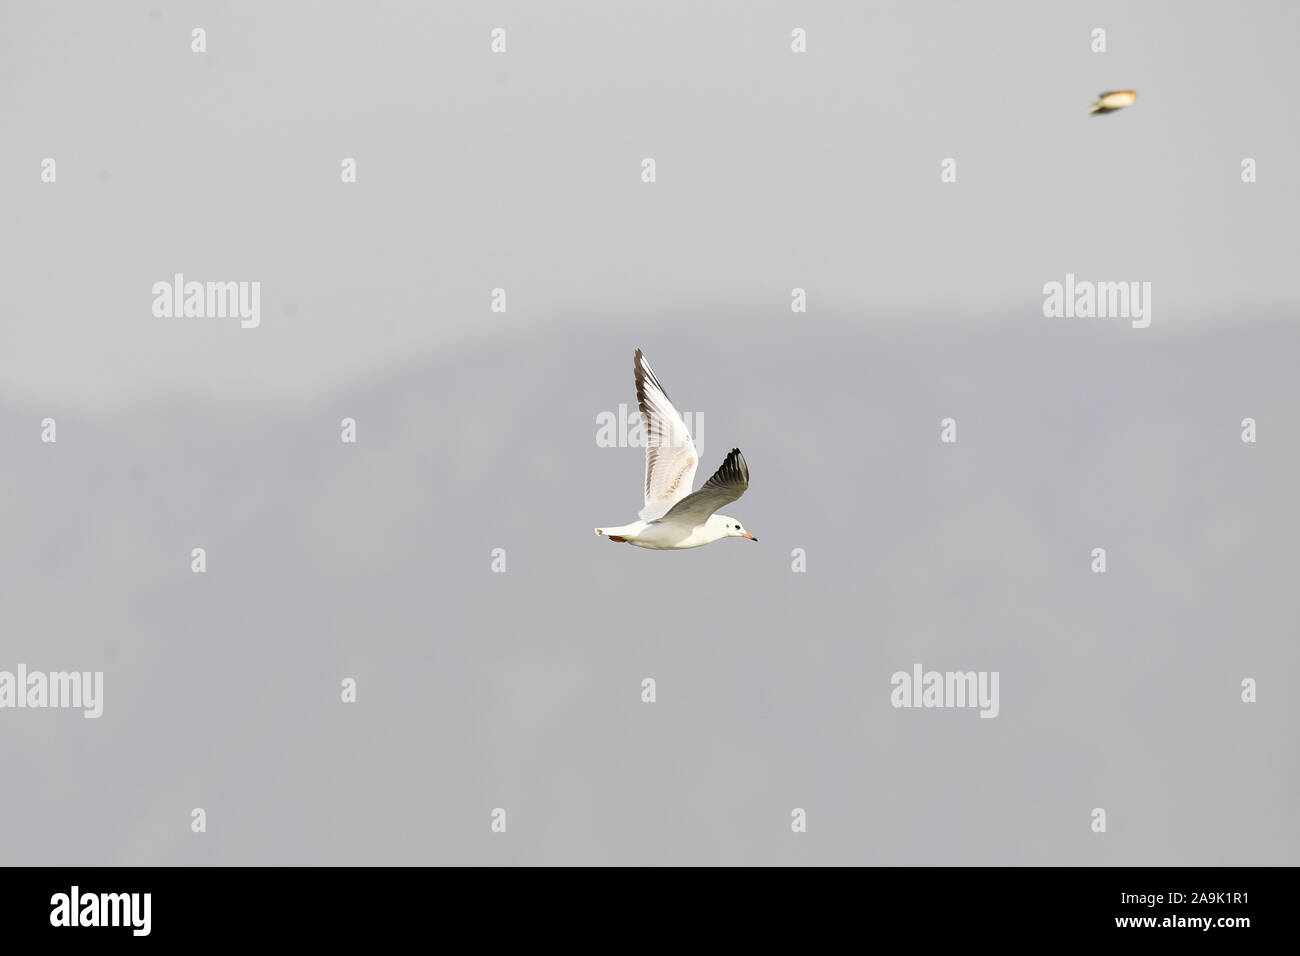 (191116) -- HOHHOT, Nov. 16, 2019 (Xinhua) -- A bird flies over the Hailiu reservoir in Tumd Left Banner in north China's Inner Mongolia Autonomous Region, Nov. 16, 2019. A large number of migrant birds have recently stopped at the reservoir for a break before flying to the south. (Xinhua/Liu Lei) Stock Photo